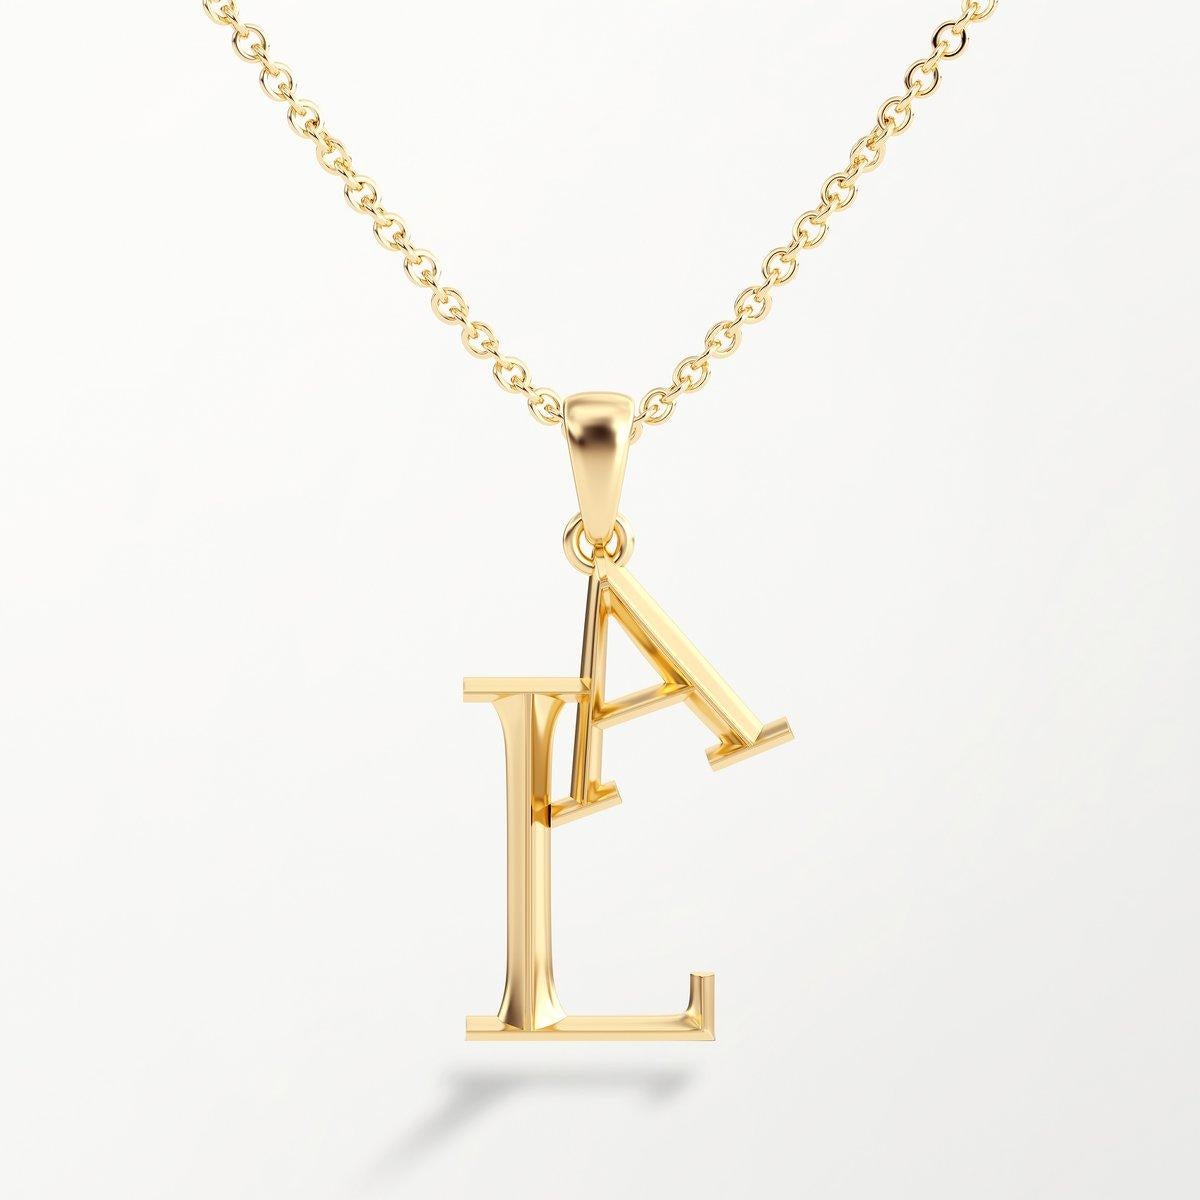 Medium Initial Pendant Necklace in 18k Yellow, White or Rose Gold 32